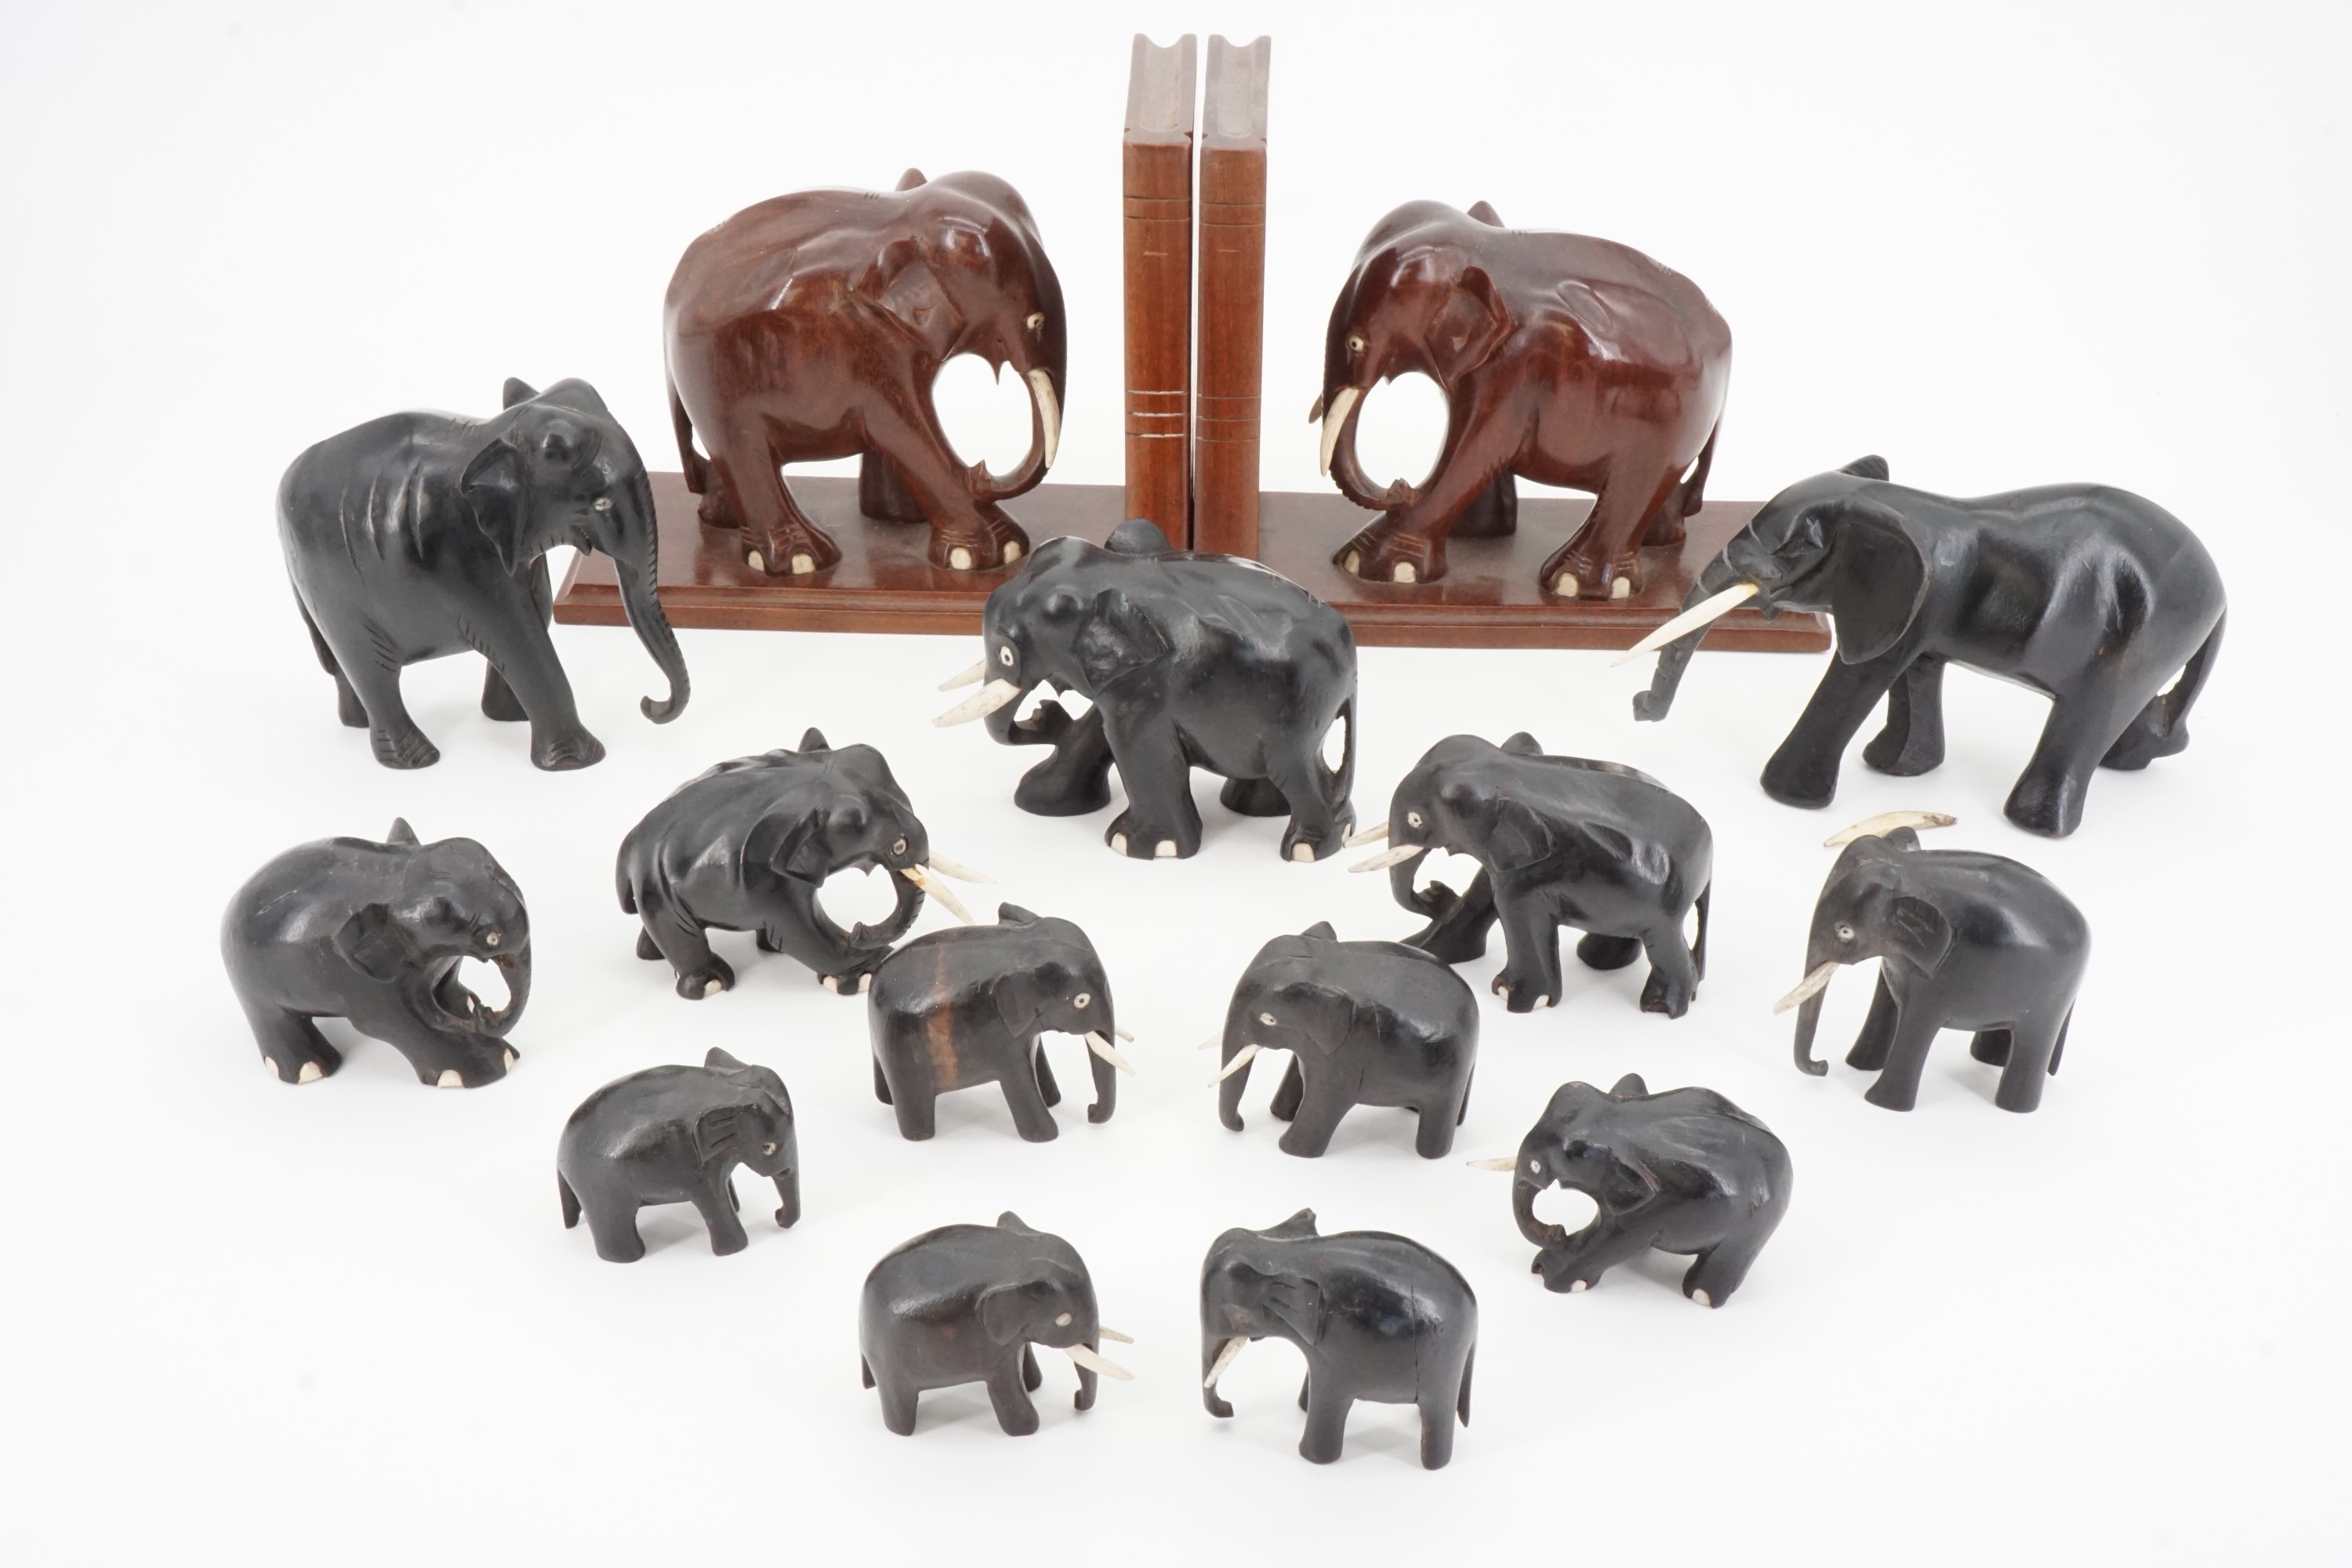 Carved wooden elephant bookends together with other elephant ornaments